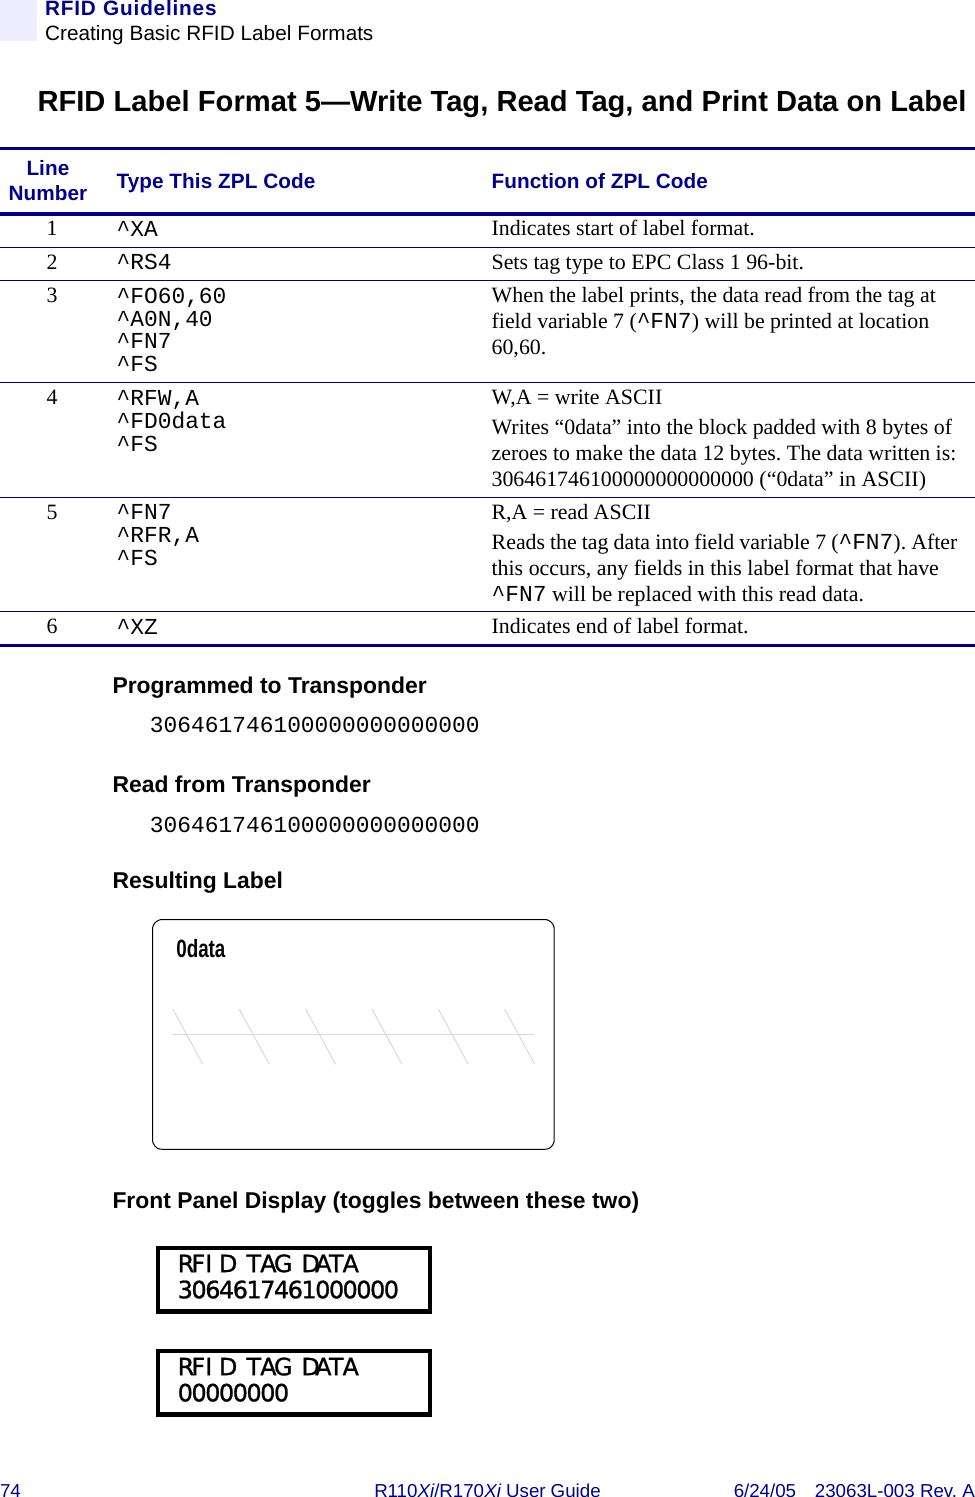 74 R110Xi/R170Xi User Guide 6/24/05 23063L-003 Rev. ARFID GuidelinesCreating Basic RFID Label FormatsRFID Label Format 5—Write Tag, Read Tag, and Print Data on LabelProgrammed to Transponder306461746100000000000000Read from Transponder306461746100000000000000Resulting LabelFront Panel Display (toggles between these two)Line Number Type This ZPL Code Function of ZPL Code1^XA Indicates start of label format.2^RS4 Sets tag type to EPC Class 1 96-bit.3^FO60,60^A0N,40^FN7^FSWhen the label prints, the data read from the tag at field variable 7 (^FN7) will be printed at location 60,60.4^RFW,A^FD0data^FSW,A = write ASCIIWrites “0data” into the block padded with 8 bytes of zeroes to make the data 12 bytes. The data written is: 306461746100000000000000 (“0data” in ASCII)5^FN7^RFR,A^FSR,A = read ASCIIReads the tag data into field variable 7 (^FN7). After this occurs, any fields in this label format that have ^FN7 will be replaced with this read data.6^XZ Indicates end of label format.0data RFID TAG DATA 3064617461000000 RFID TAG DATA 00000000